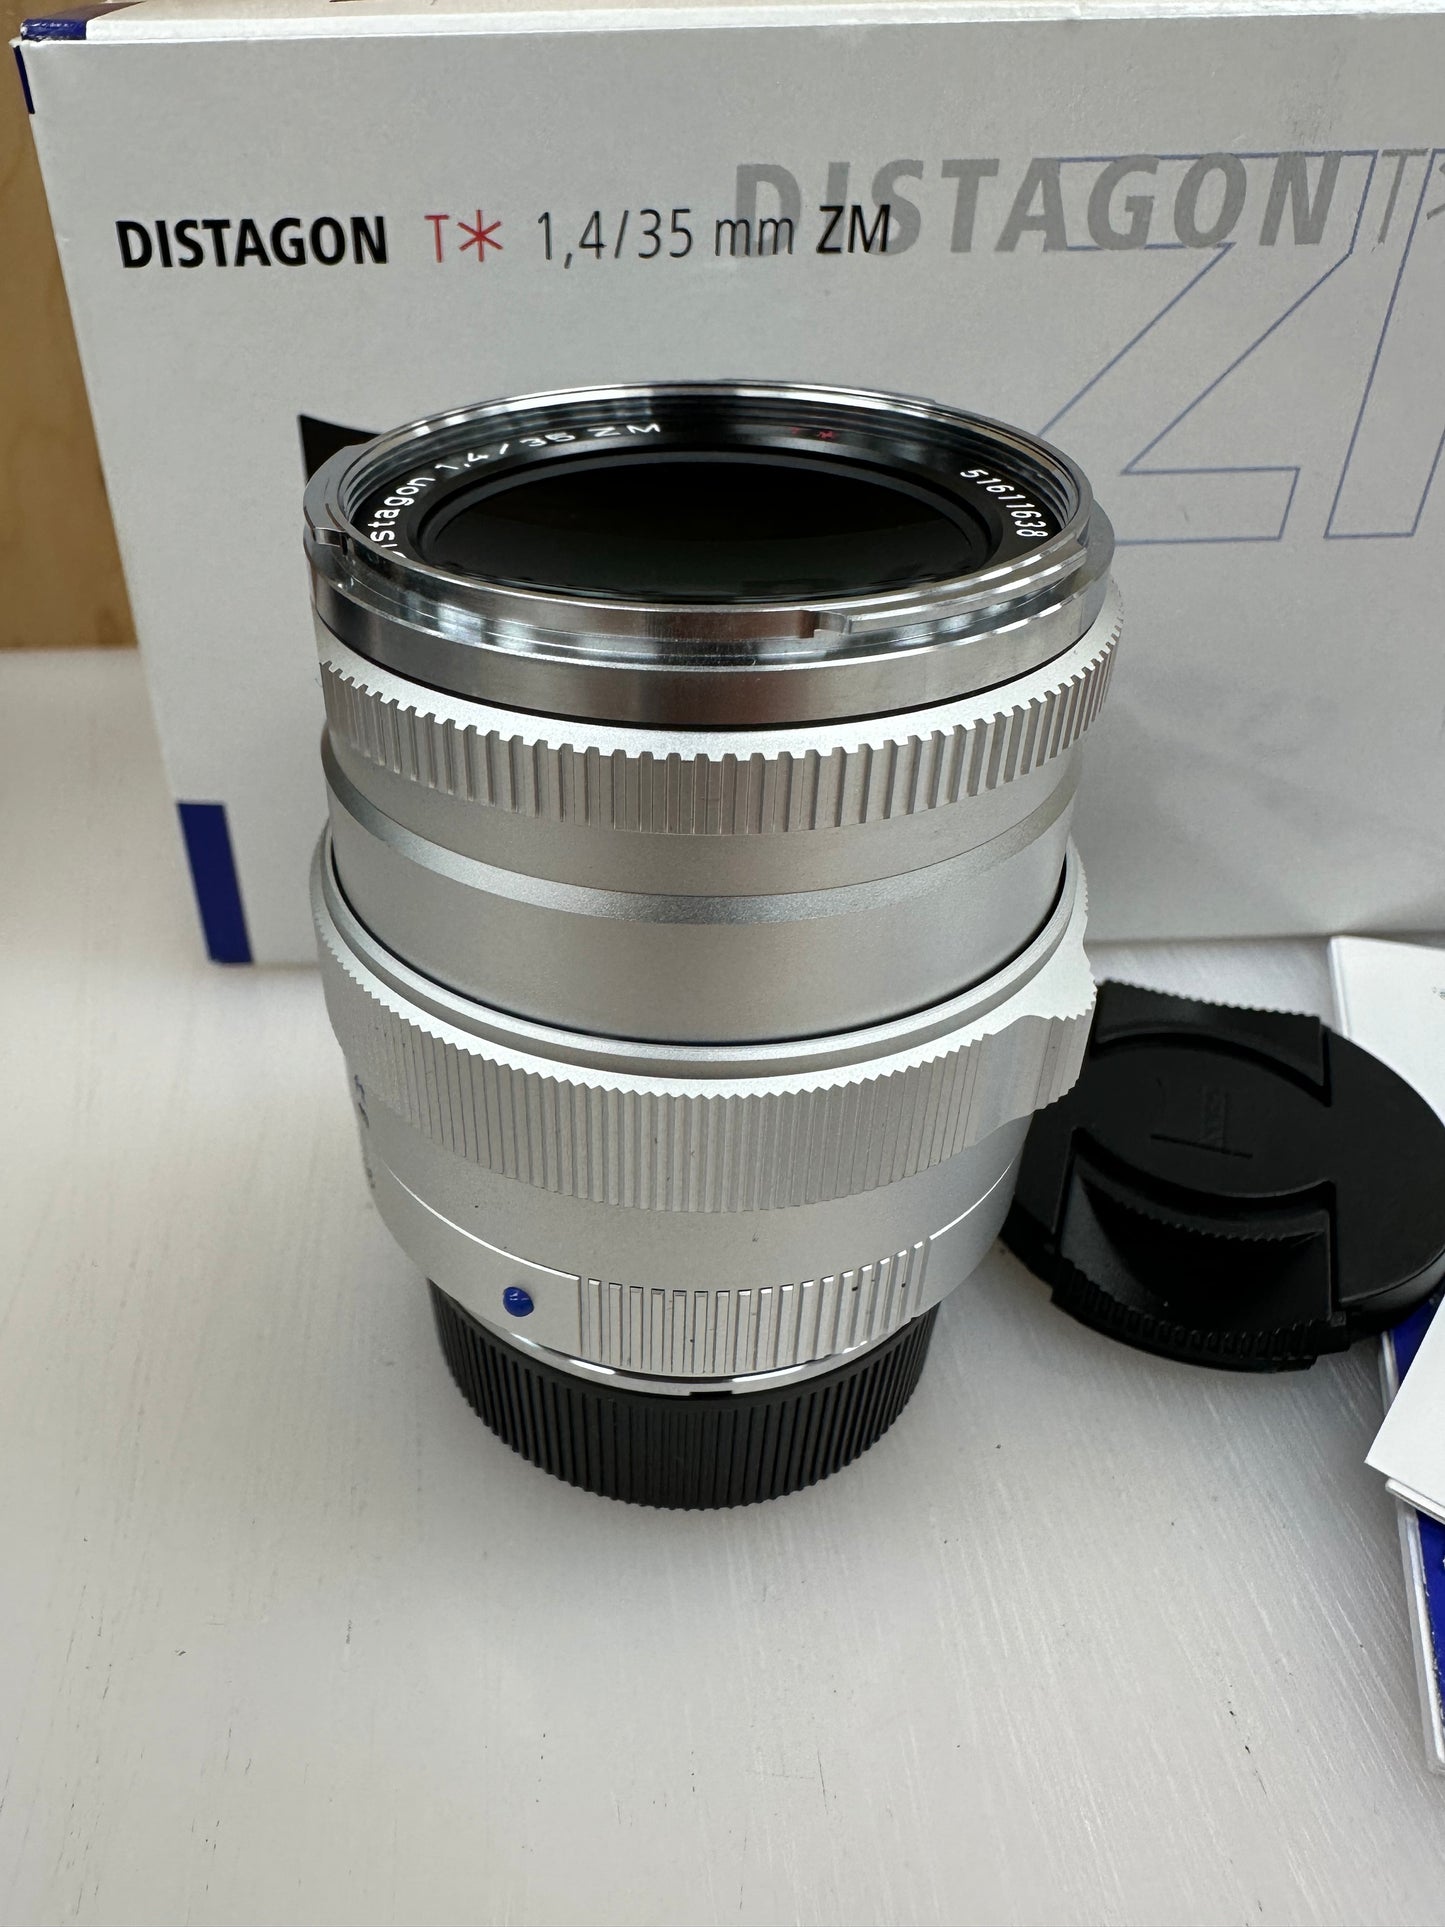 Carl Zeiss Distagon 35mm f1.4 ZM silver chrome for Leica M